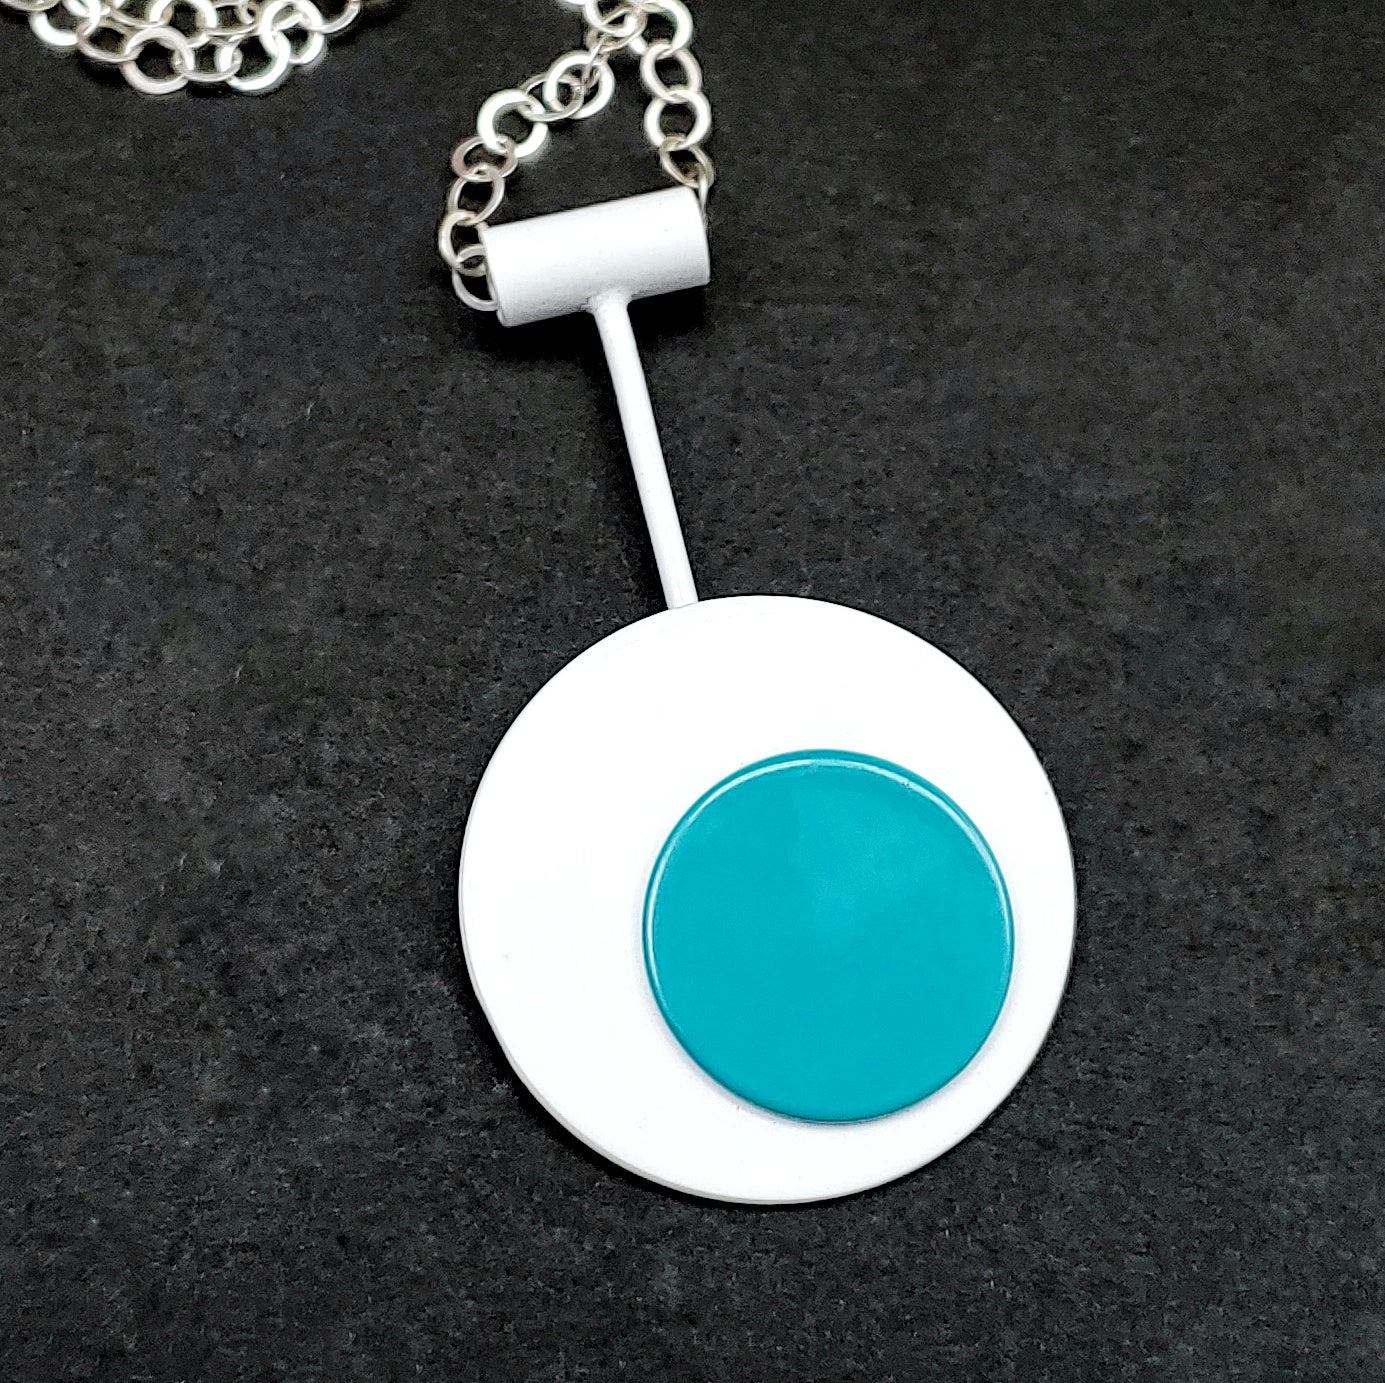 Retro Mod Necklace - White and Turquoise